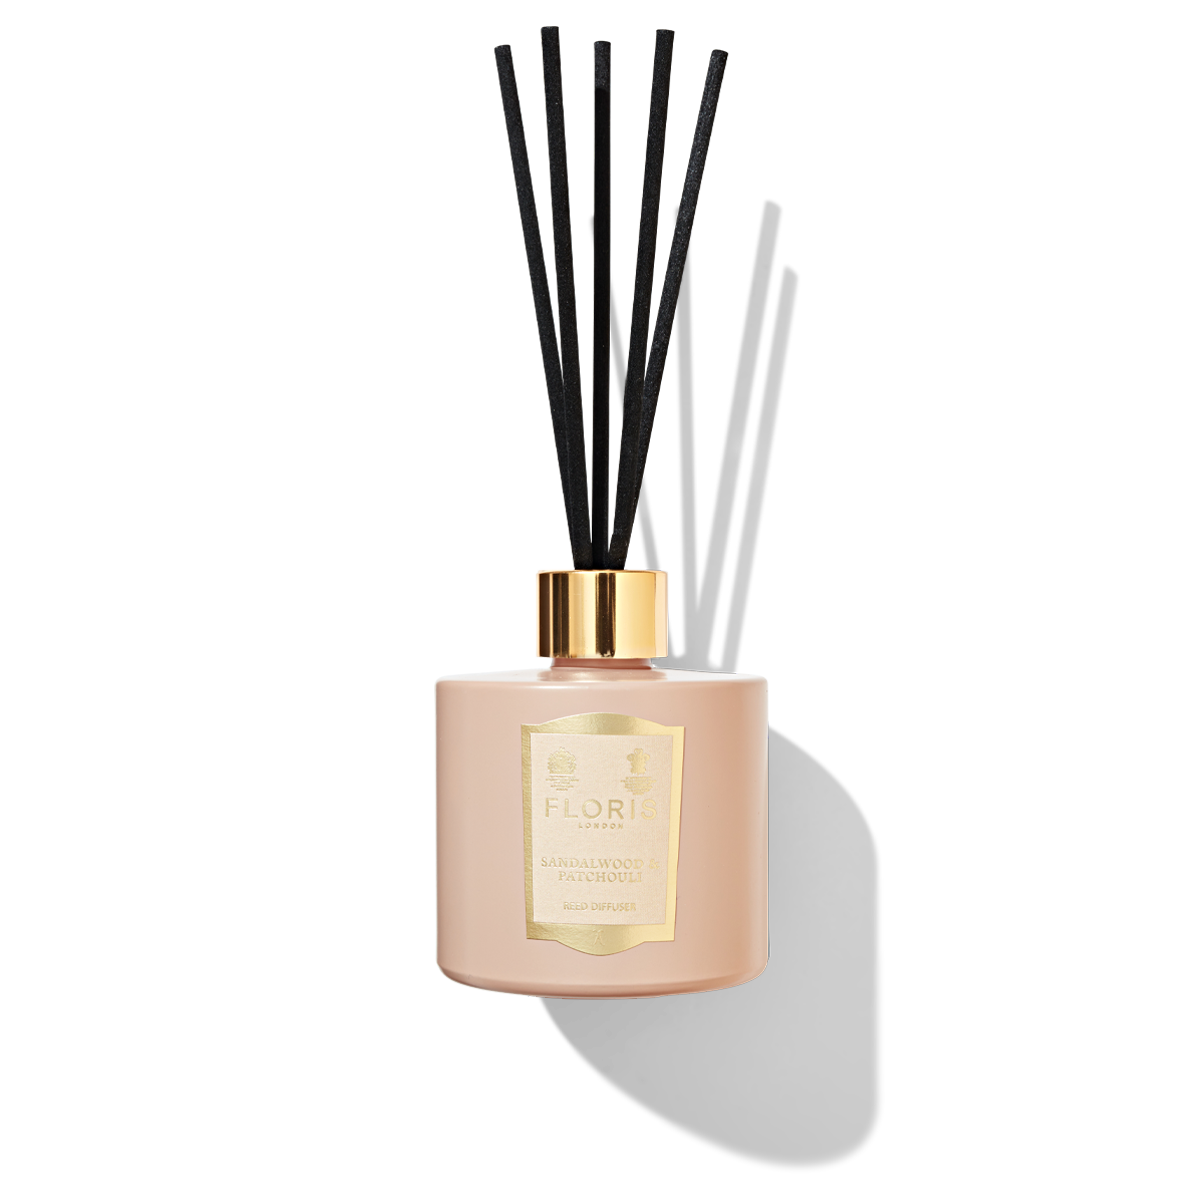 A light pink reed diffuser bottle with 5 black reeds in the top. a light pink and gold label attached with Sandalwood and patchouli printed on it.